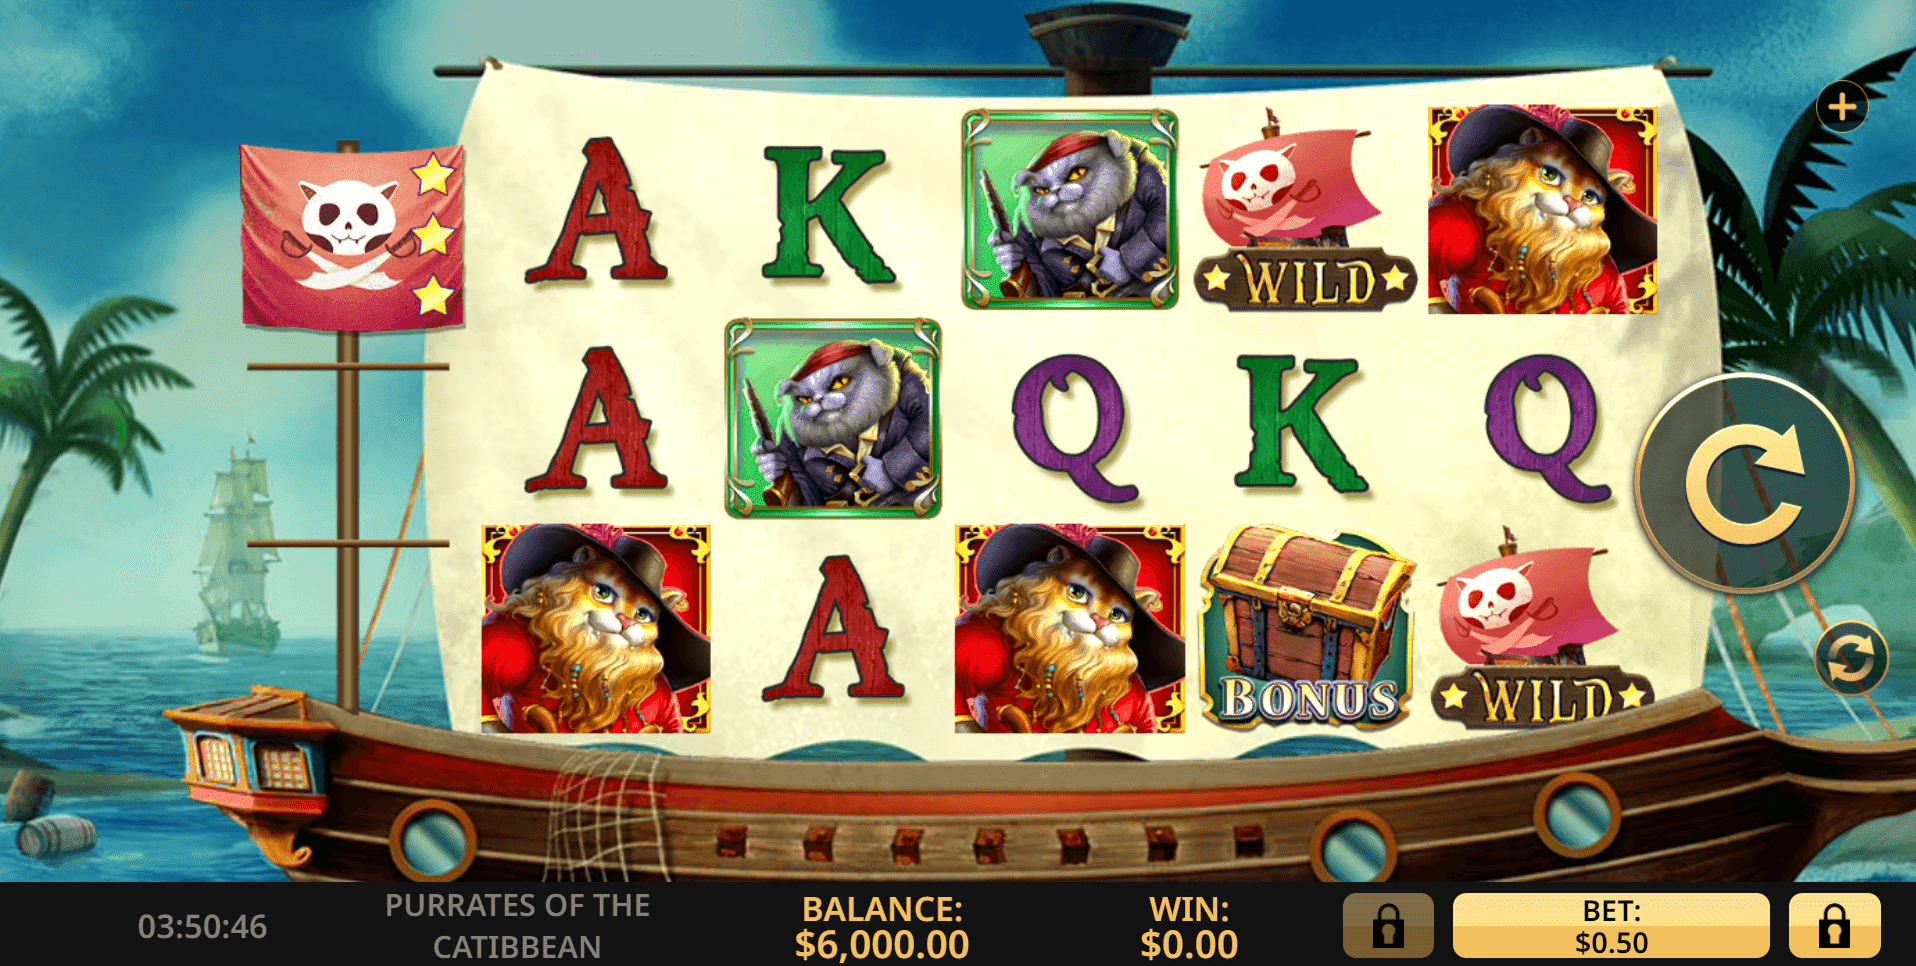 Purrates of the Catibbean slot play free